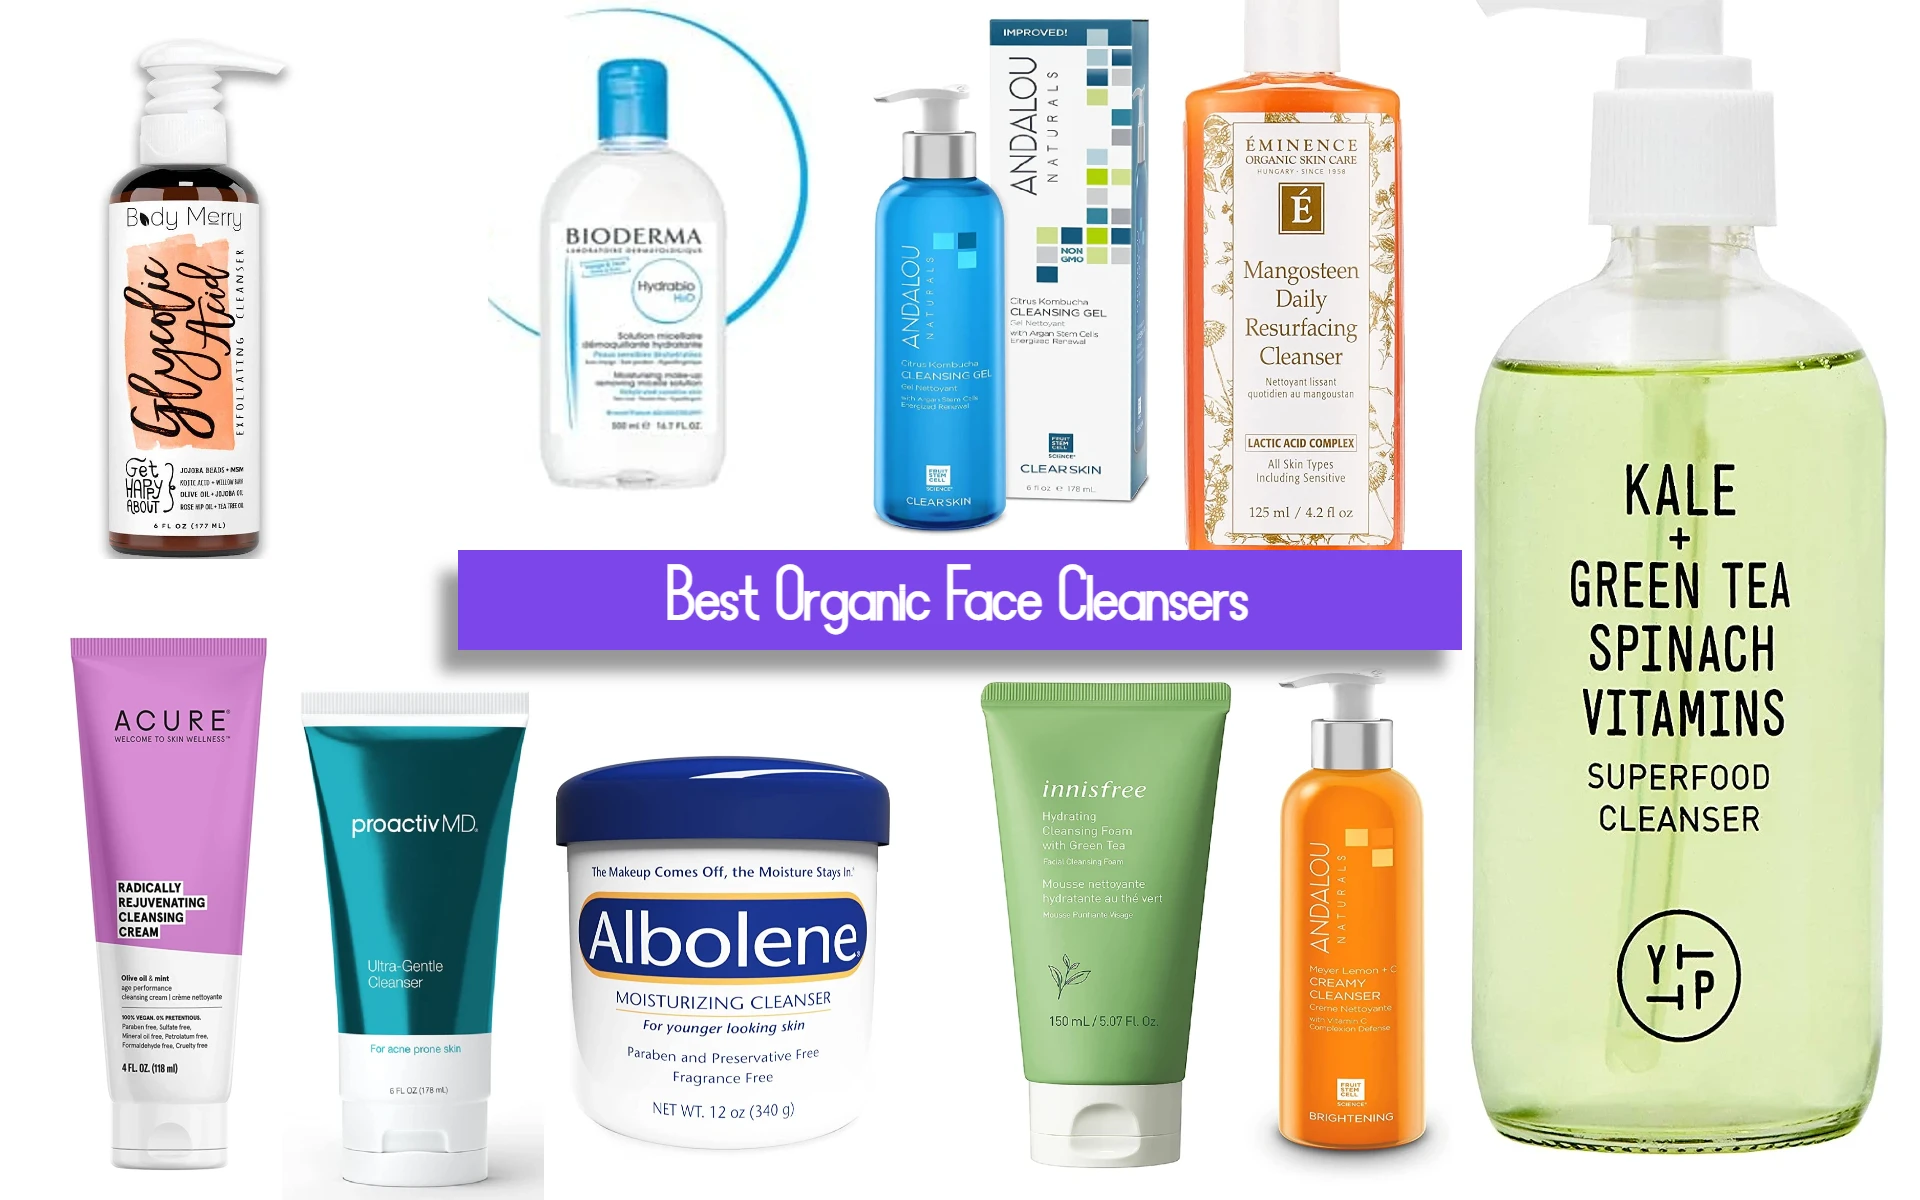 Best Organic Face Cleansers